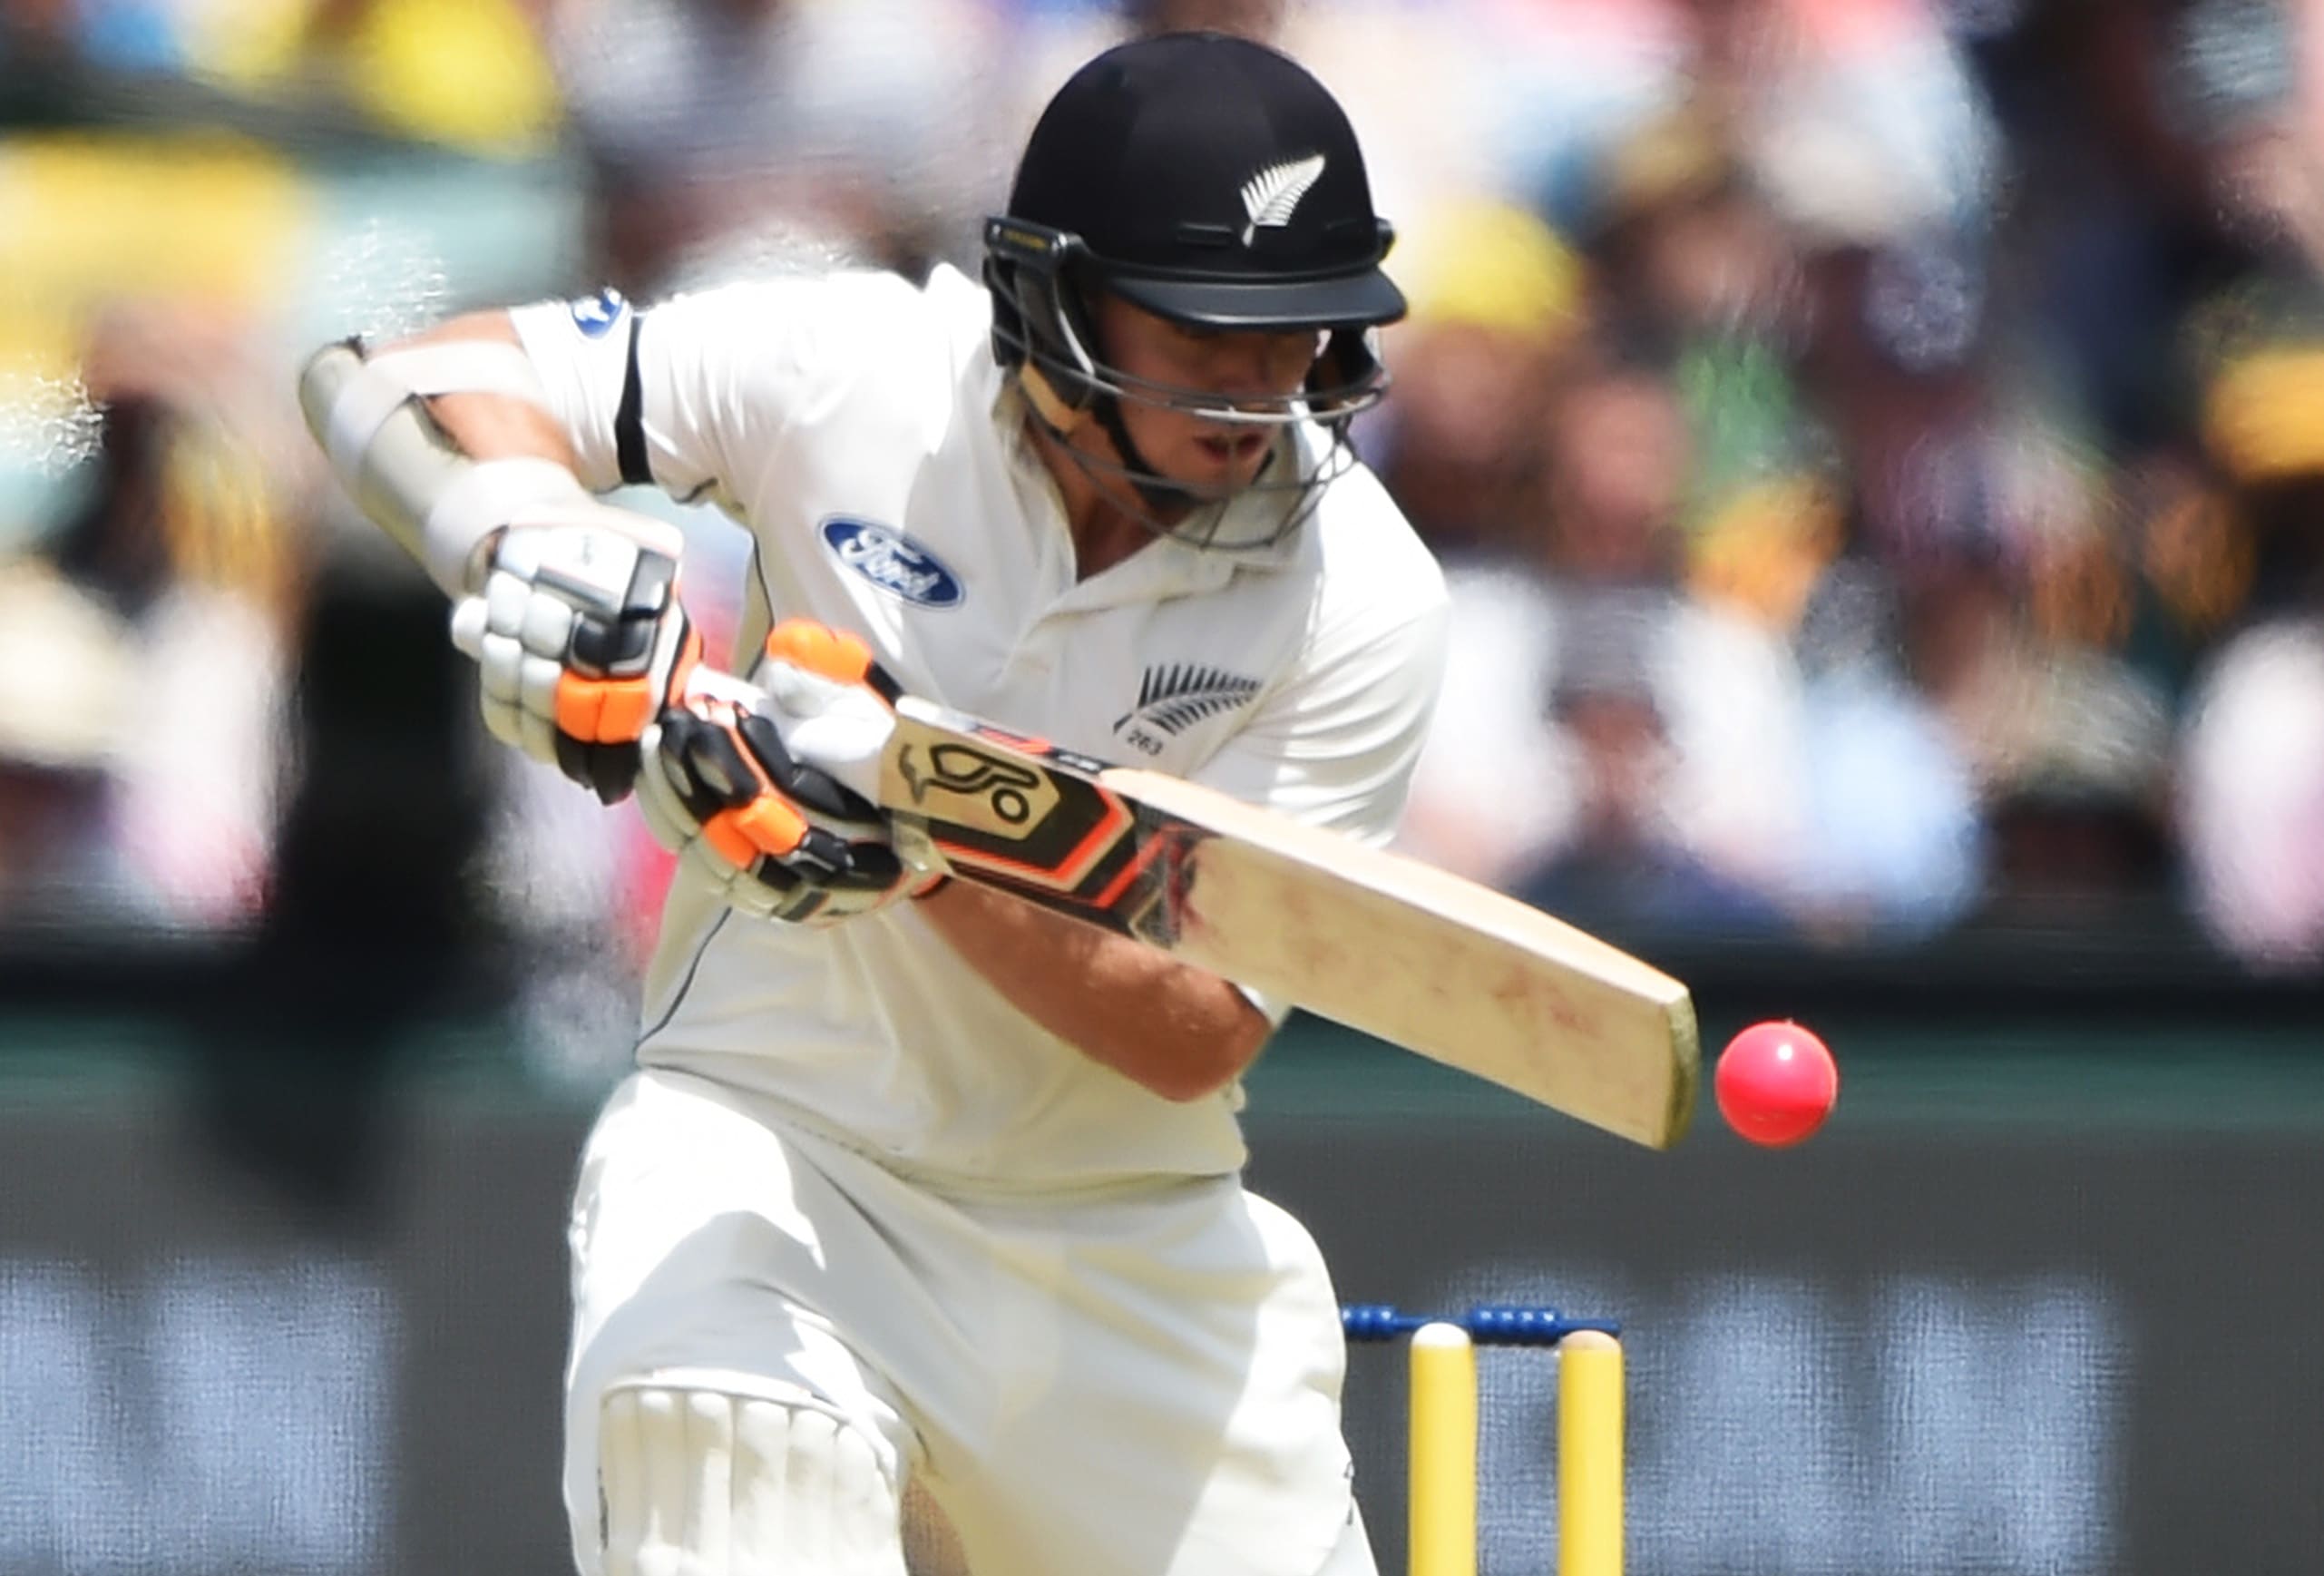 New Zealand's Tom Latham batting during the third cricket test match between New Zealand Black Caps and Australia, on 27 November 2015.